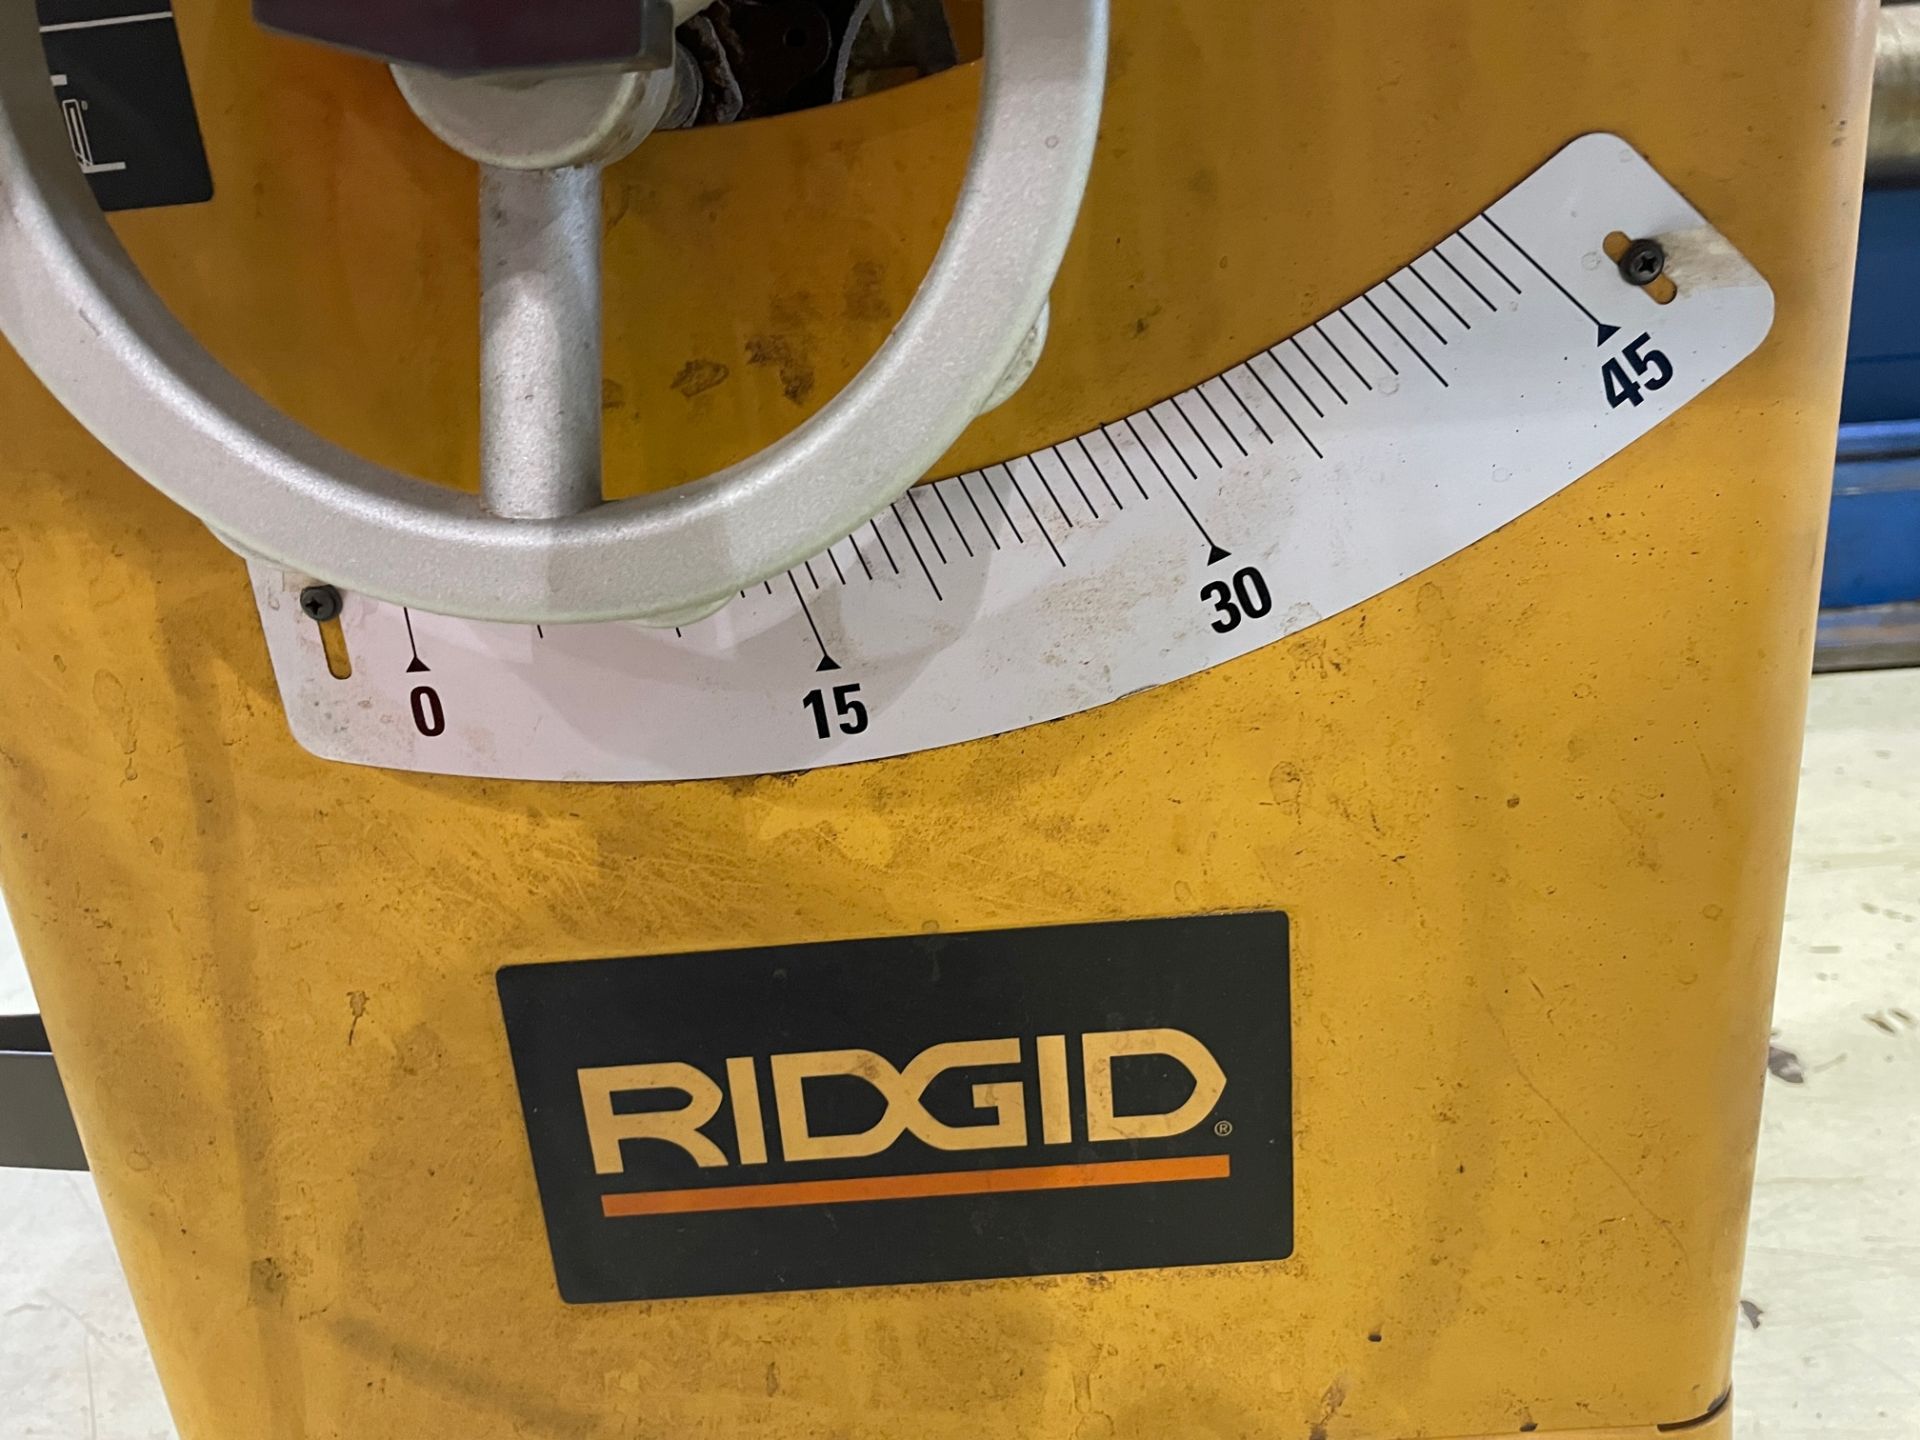 RIGID TABLE SAW, MODEL R4511, S/N CD094813056, 10'' SAW BLADE, LOCATION, MONTREAL, QUEBEC - Image 3 of 4